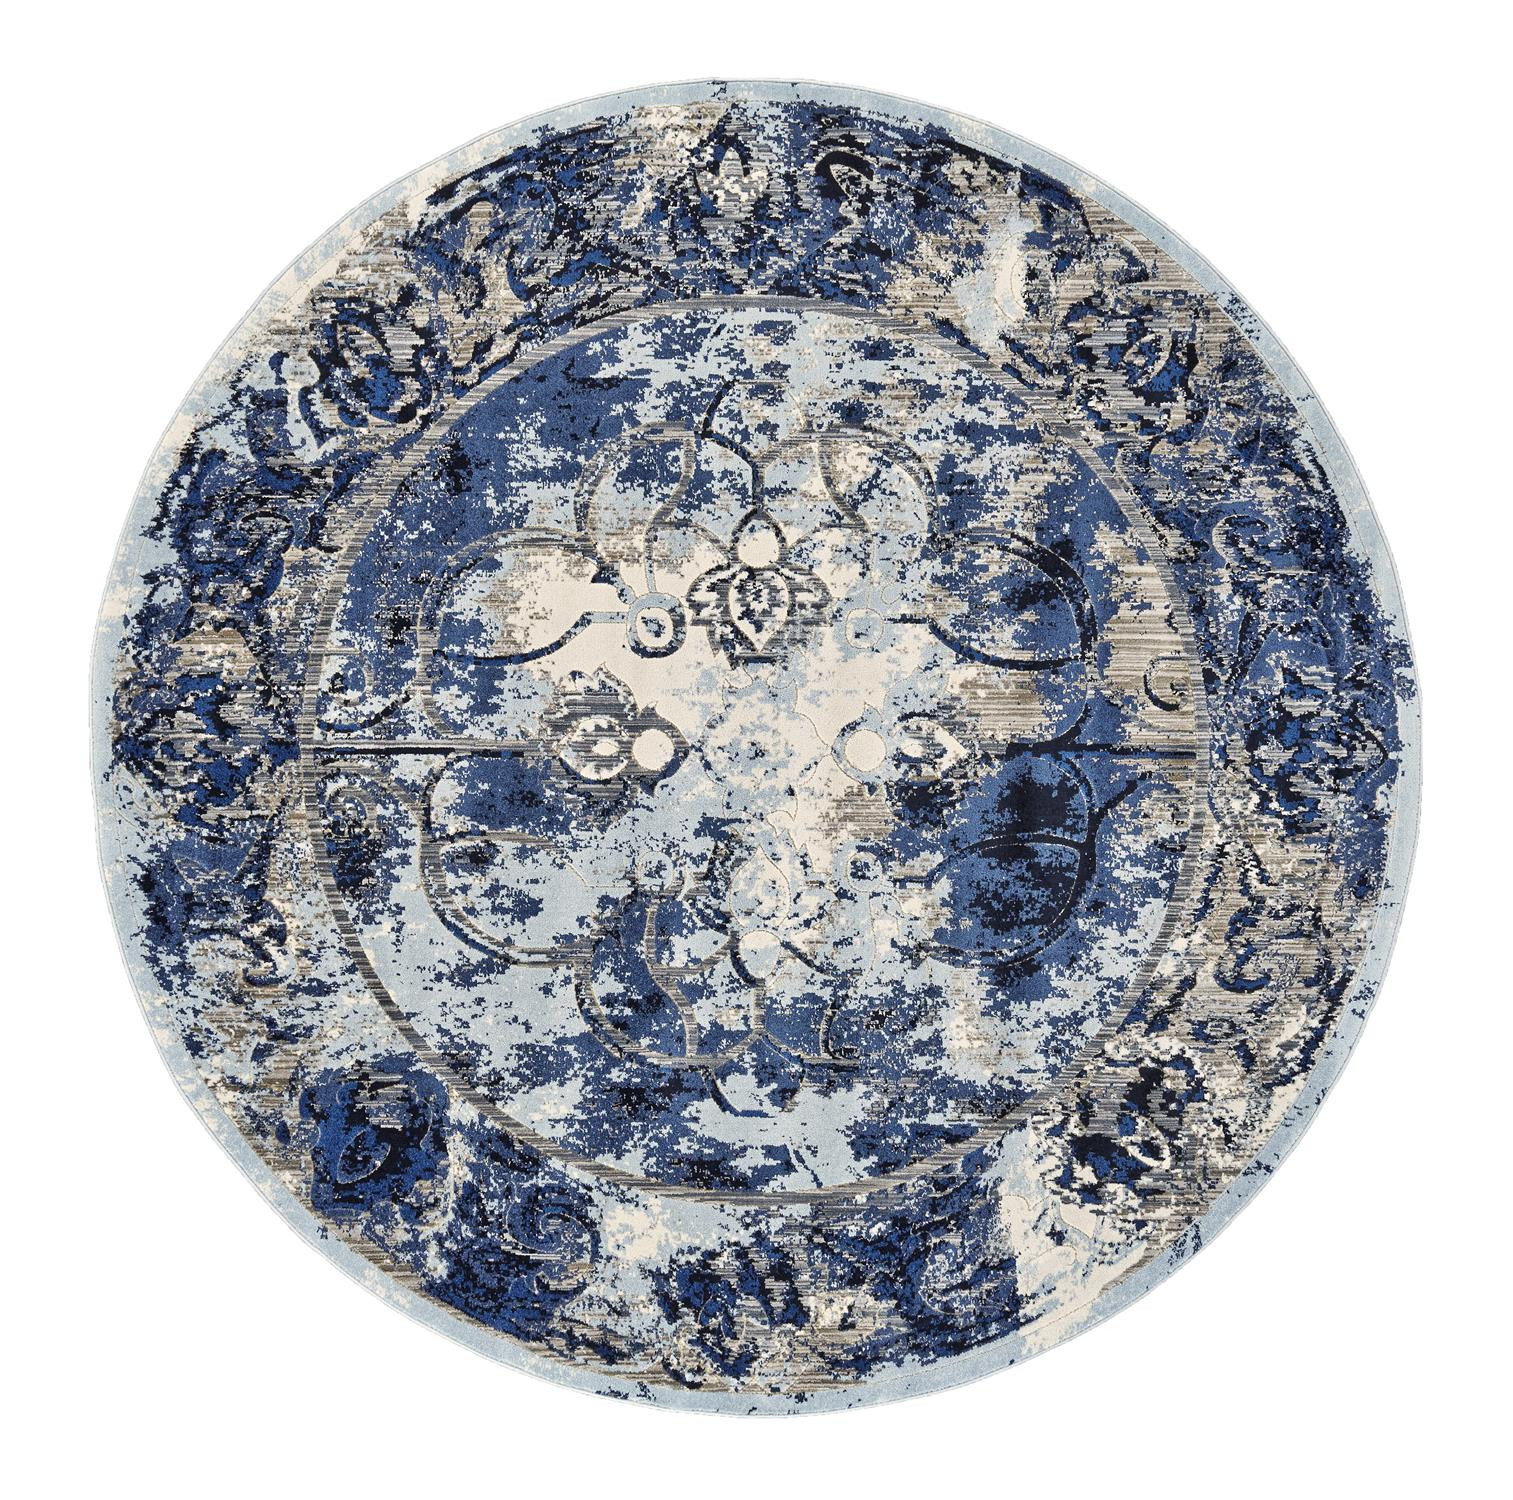 '9' Blue Ivory And Gray Round Floral Distressed Stain Resistant Area Rug-511248-1